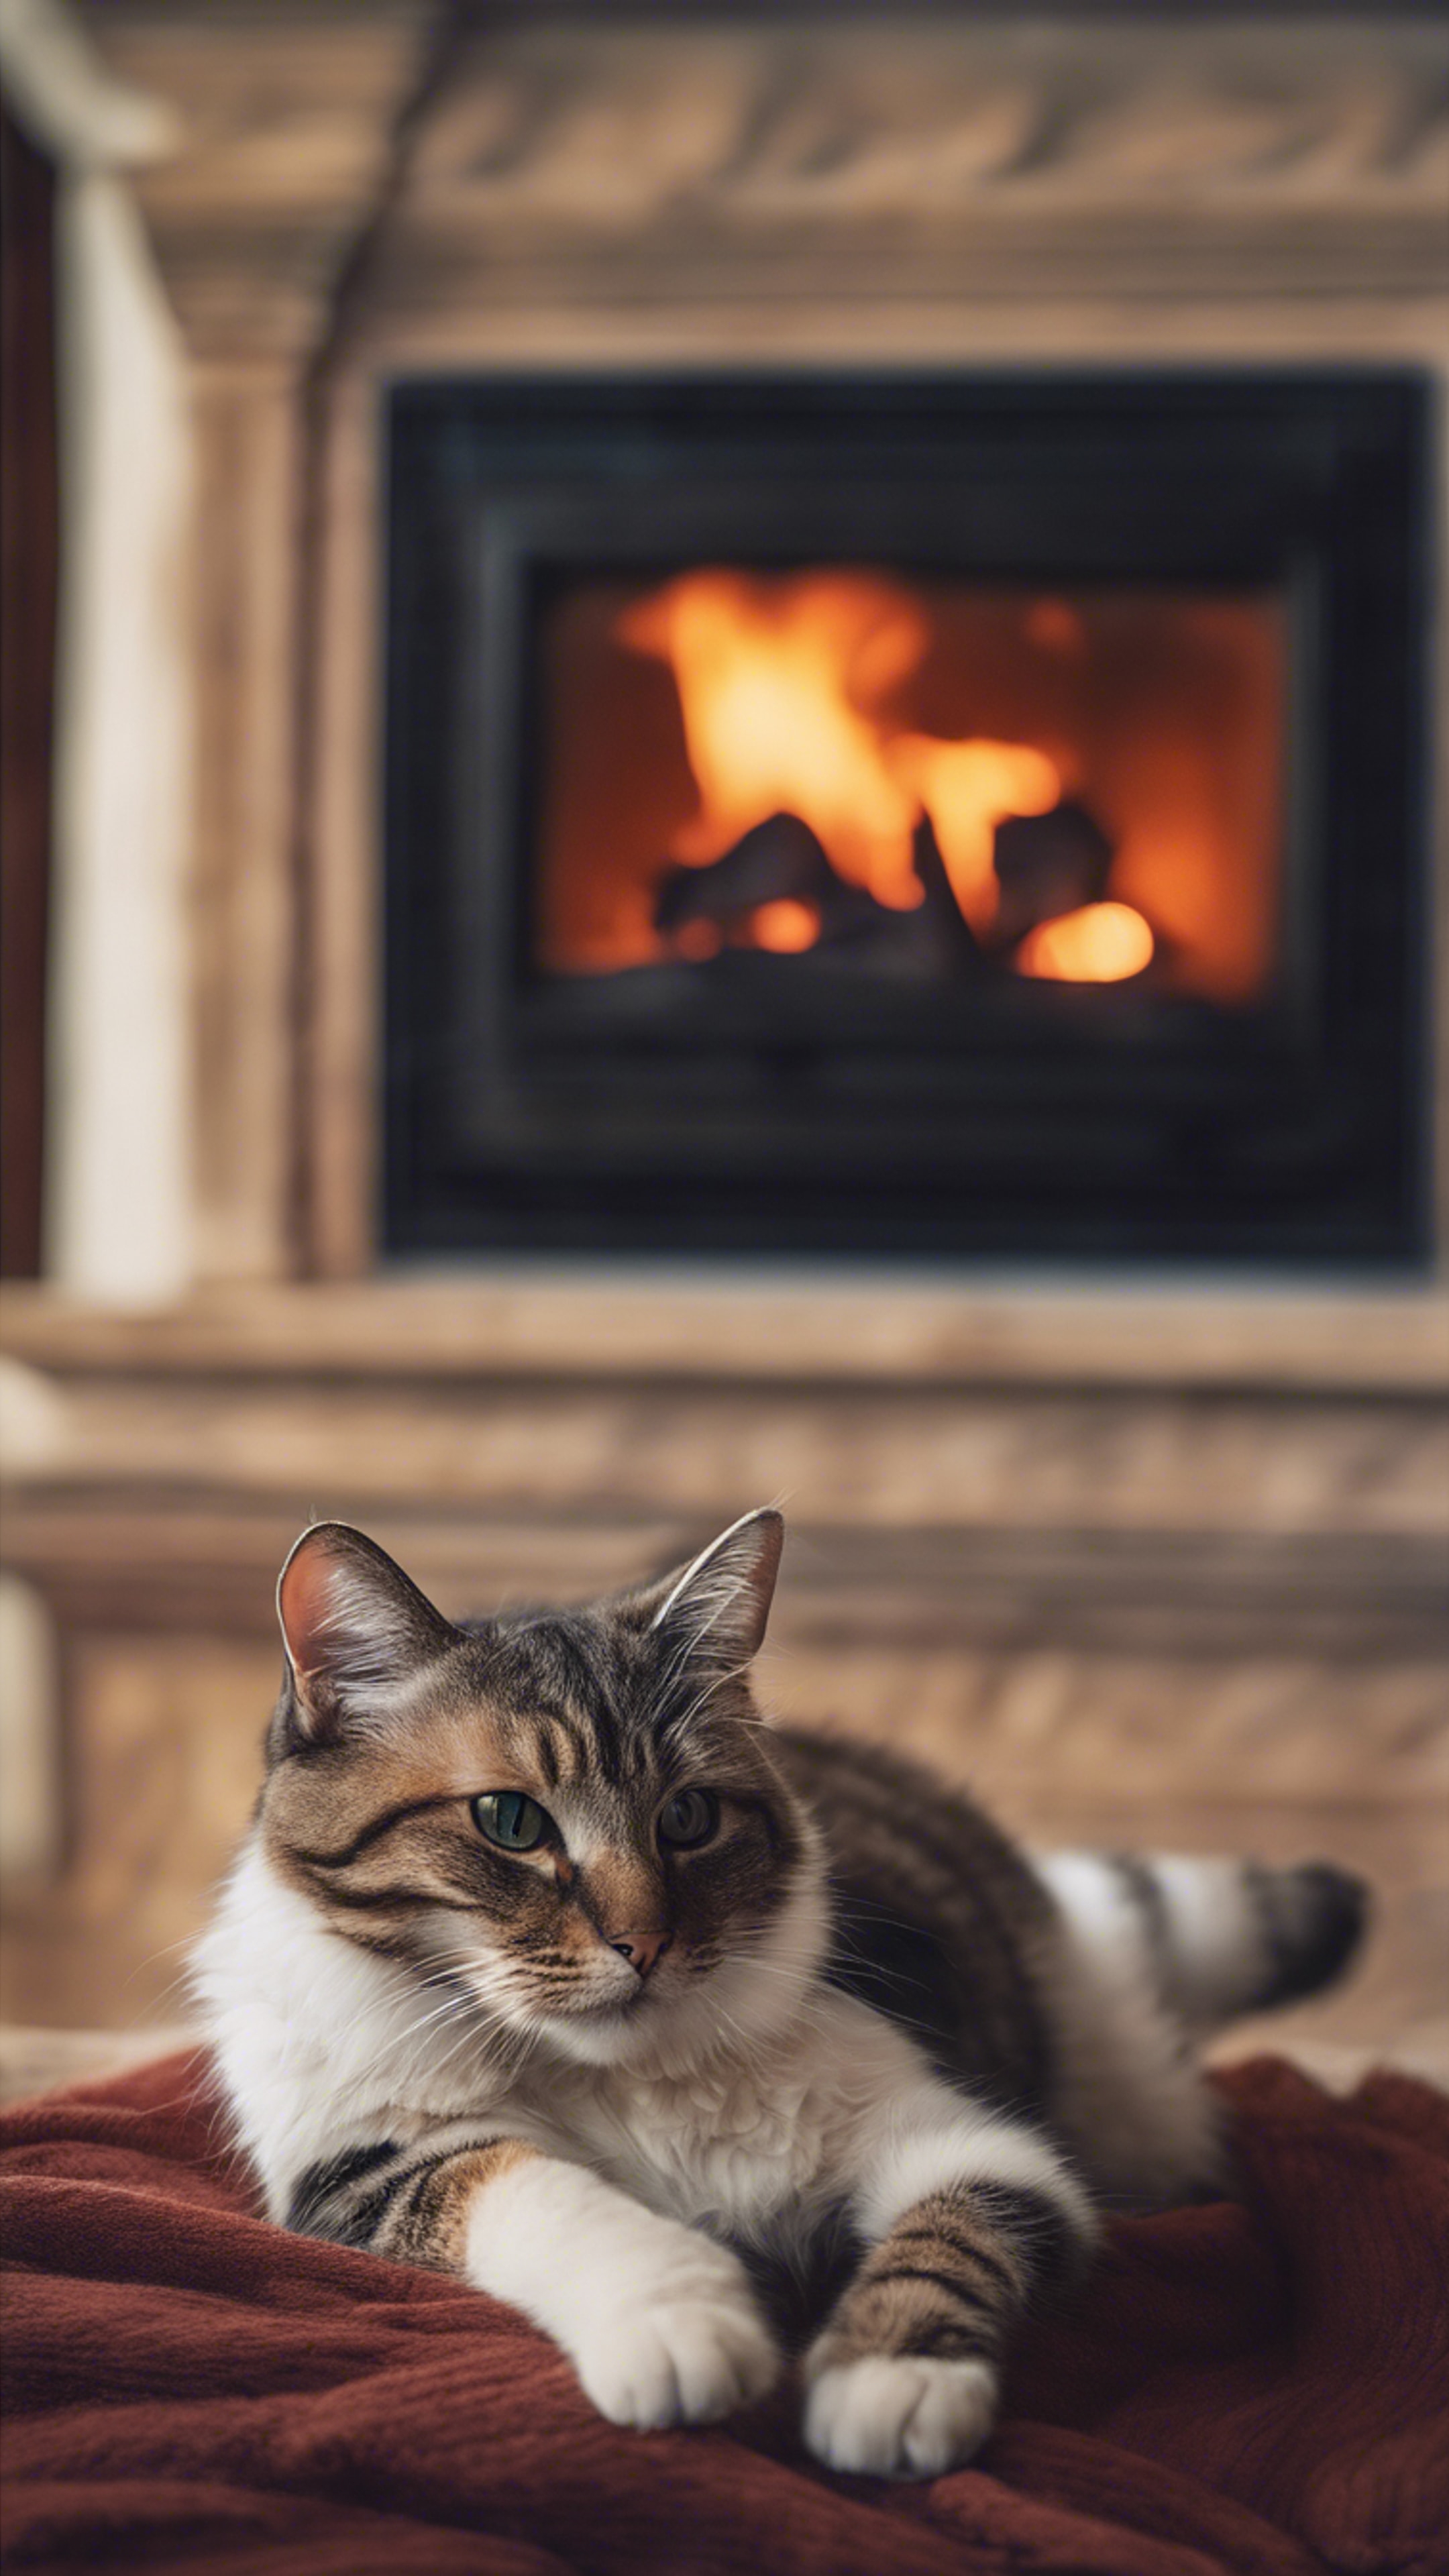 A cat lounging in front of a roaring fireplace, completely mesmerized by the flickering flames. کاغذ دیواری[f30d5ca7e04c497dade0]